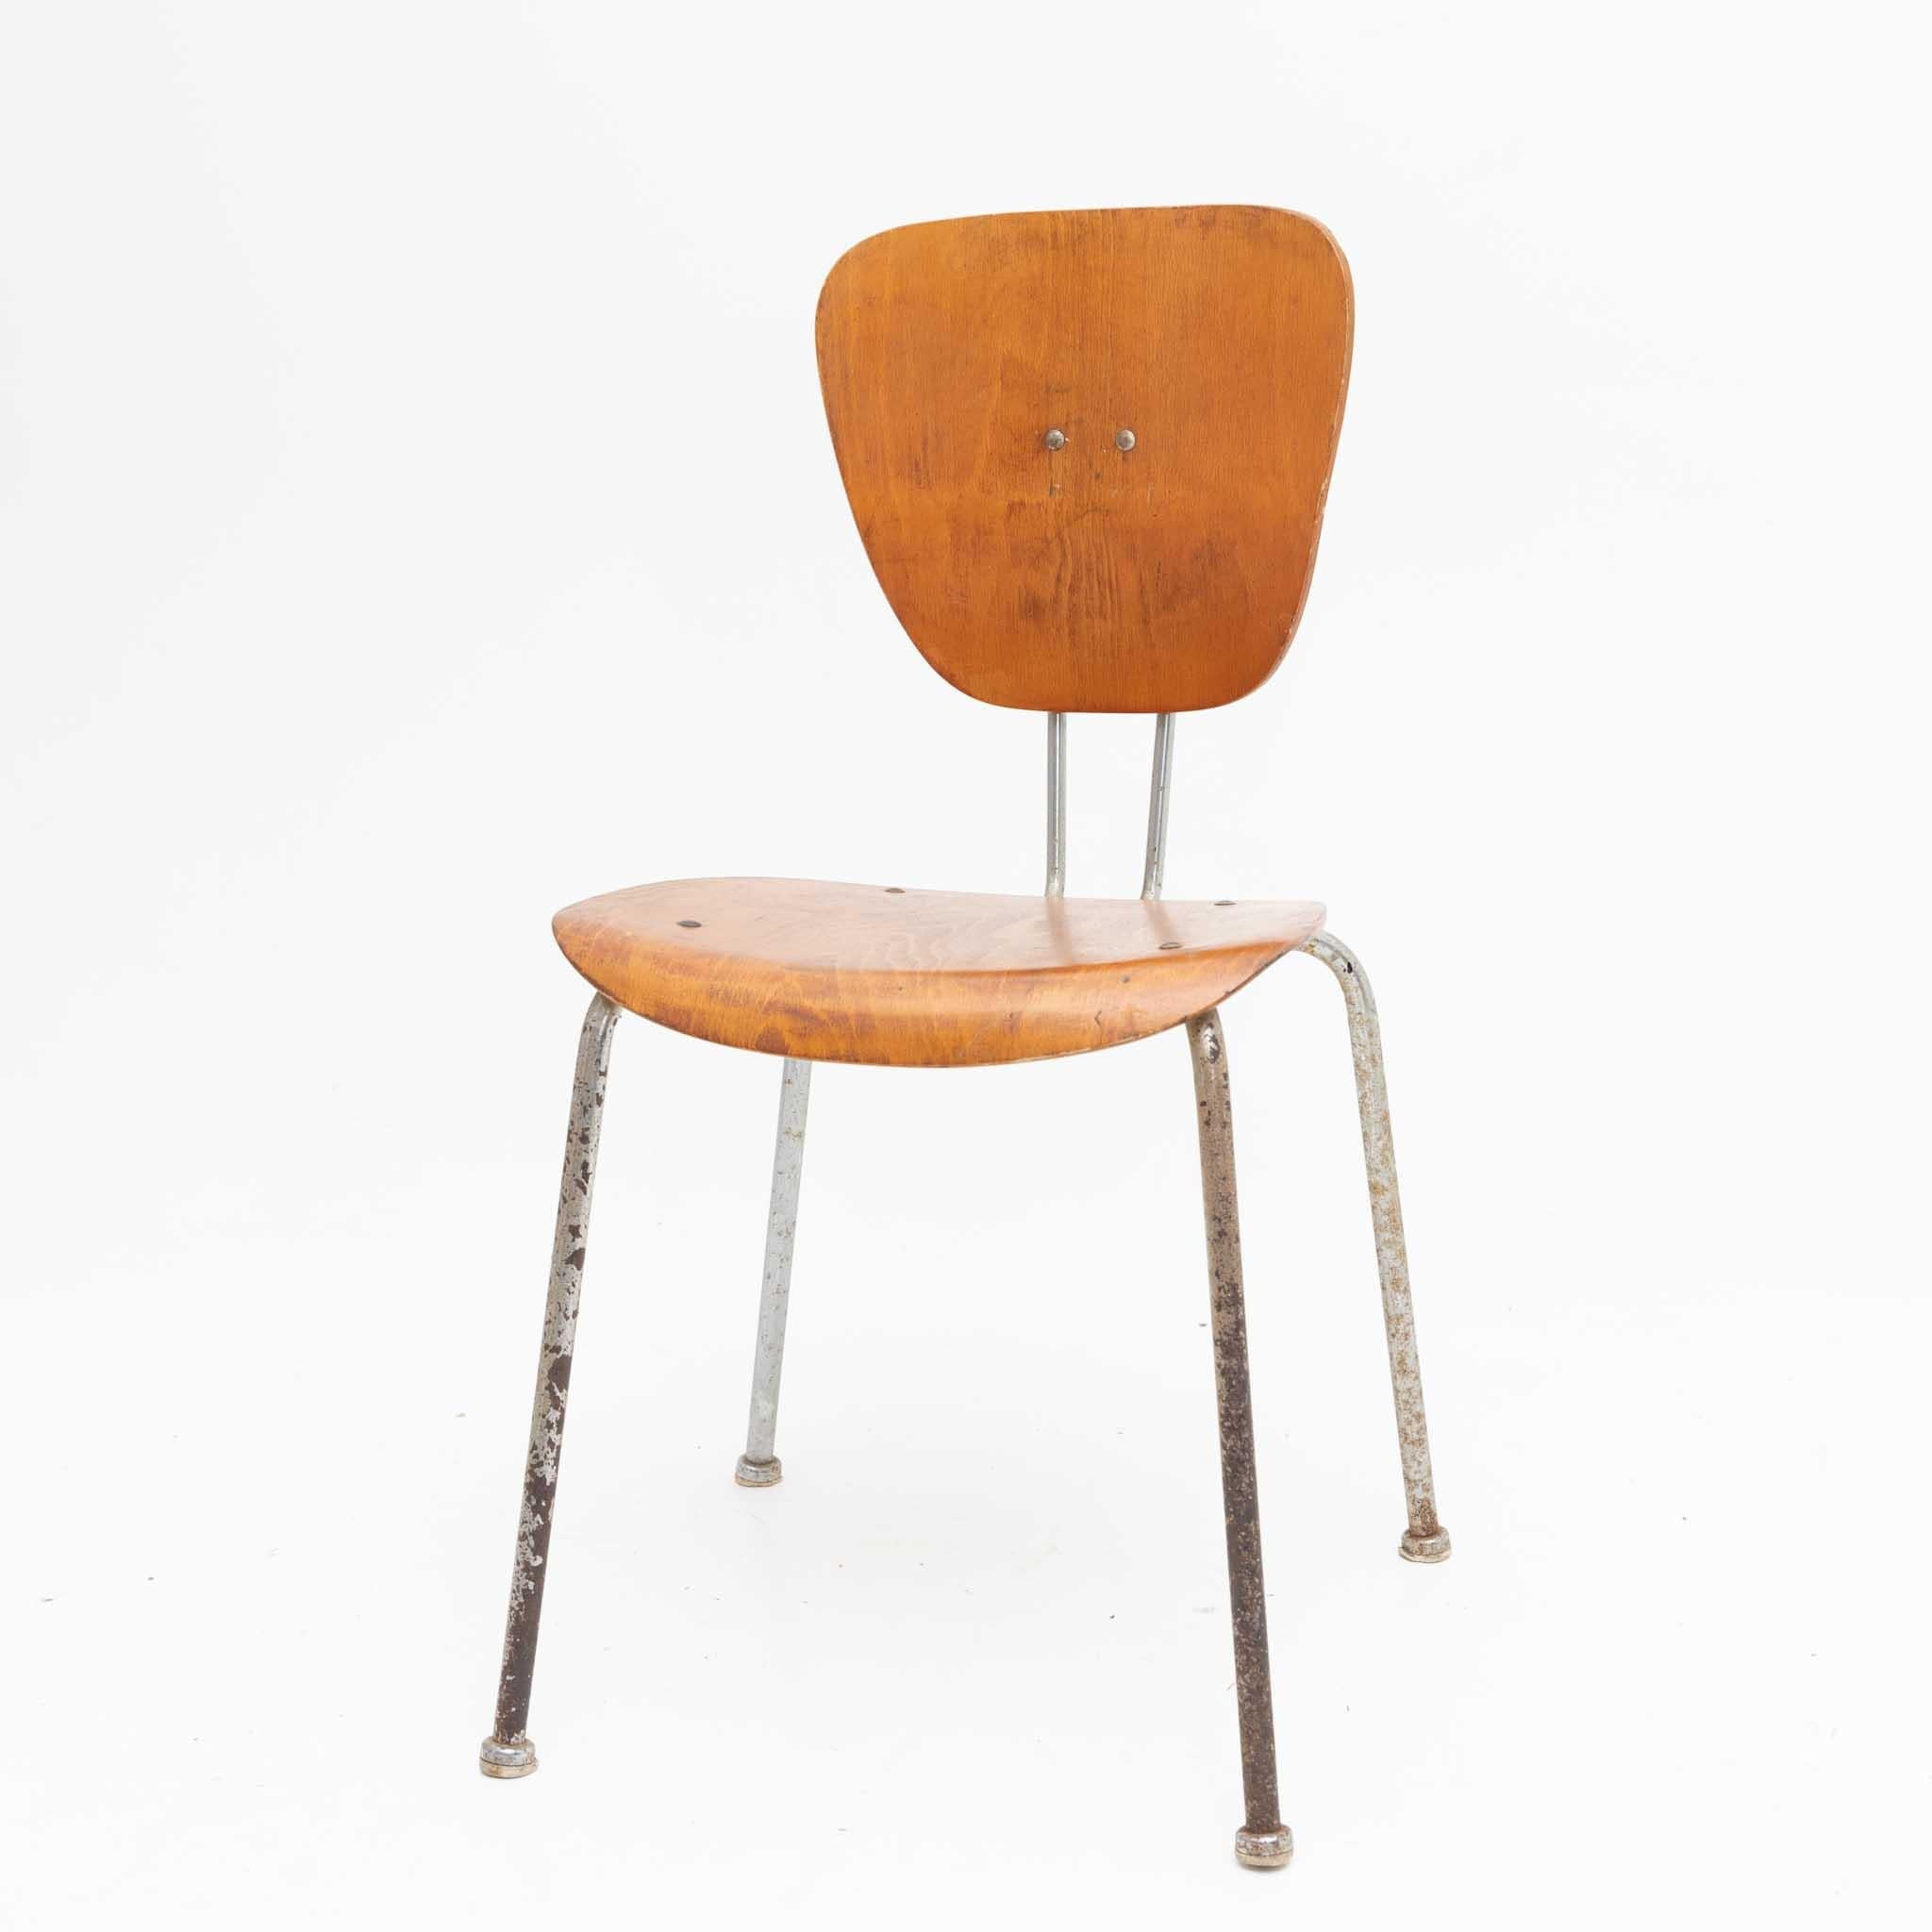 Wood Chairs in the Style of Egon Eiermann, probably Mid-20th Century For Sale